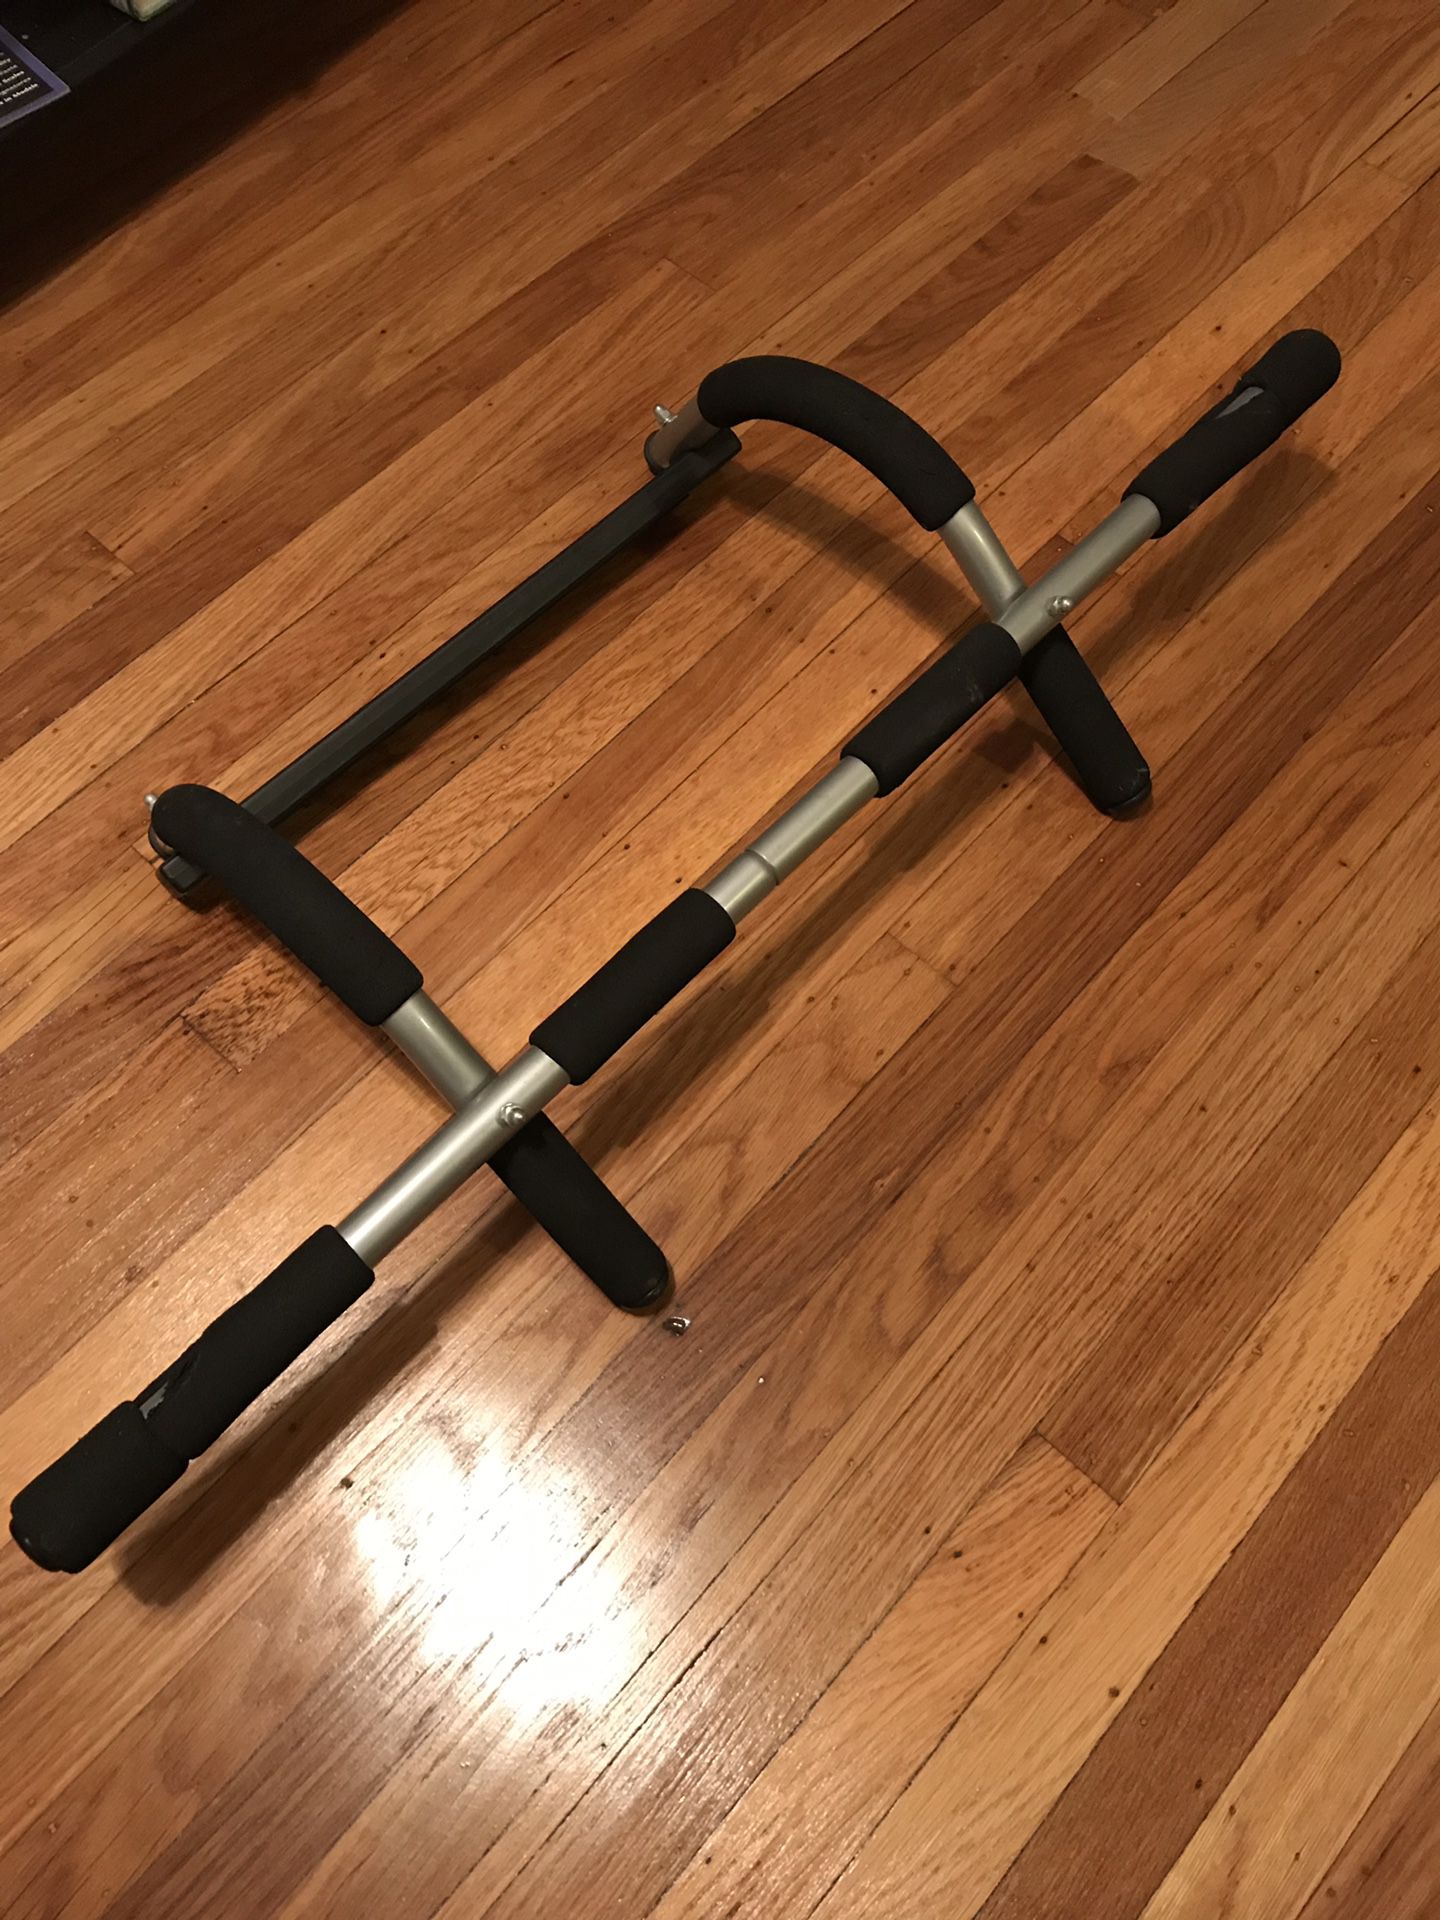 New 10lb medicine ball and used pull up bar. $10 for the pair.